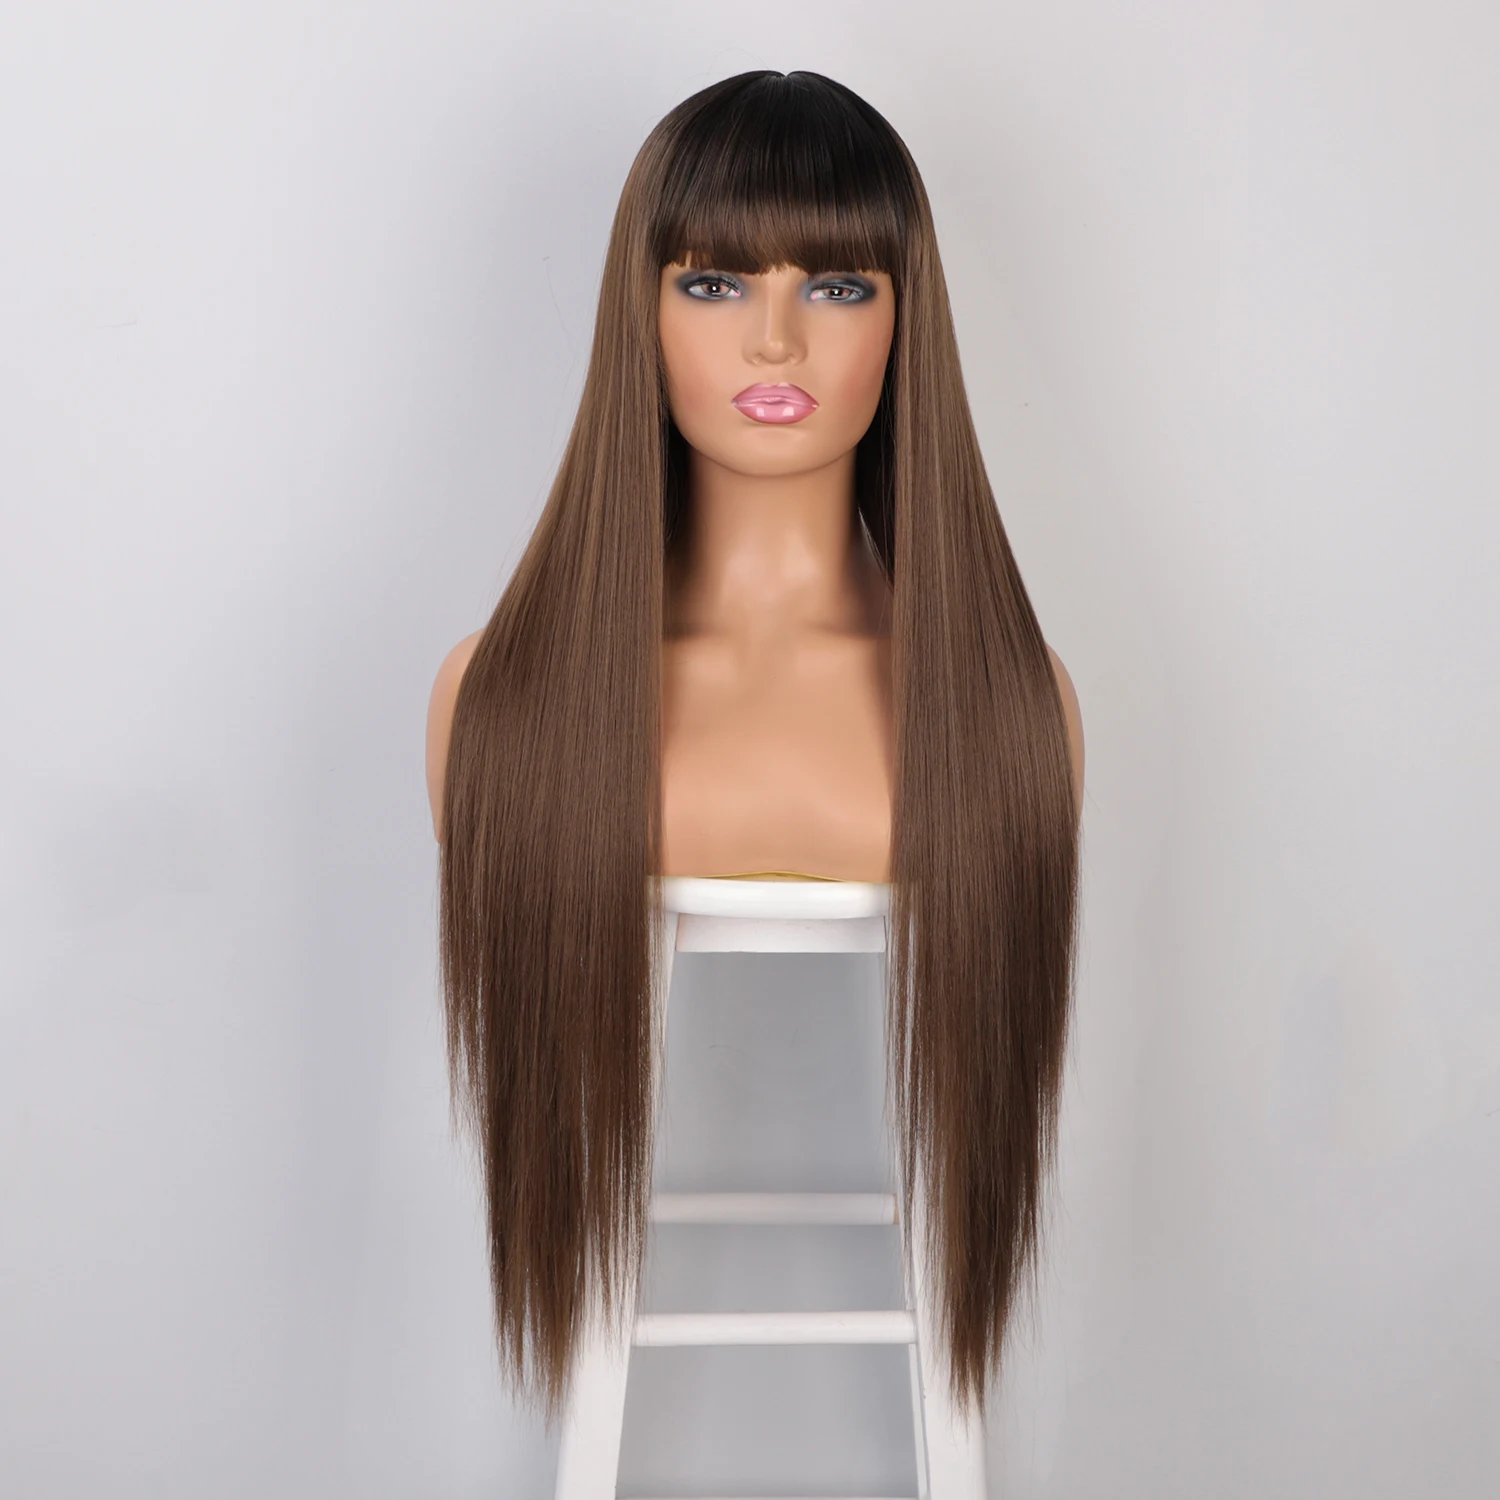 

Aisi Hair Vendor Cheap Wholesale Long Silky Straight Natural Wave Ombre Brown Wig With Bangs For Black Women Synthetic Hair Wigs